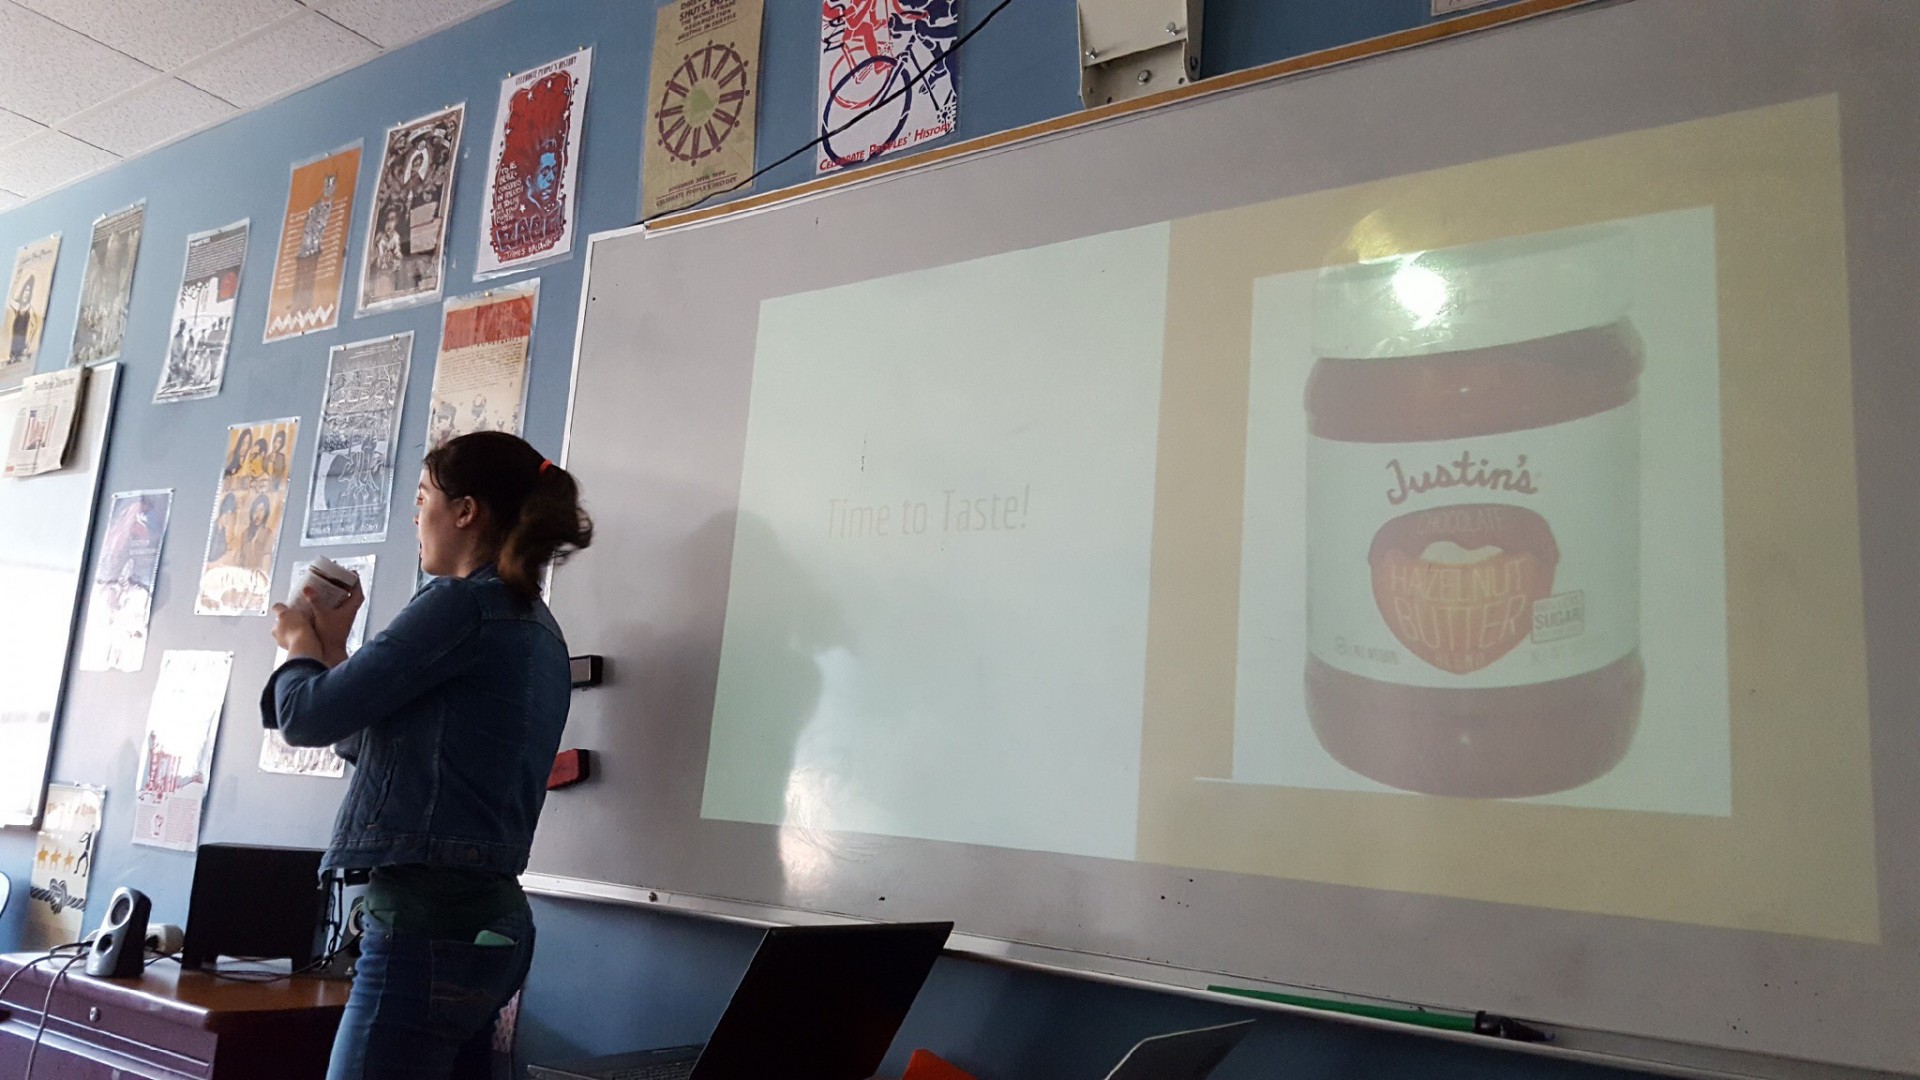 This photo was taken by Nasya Ie during my presentation. It features me introducing the hazelnut butter that I brought to be tasted.